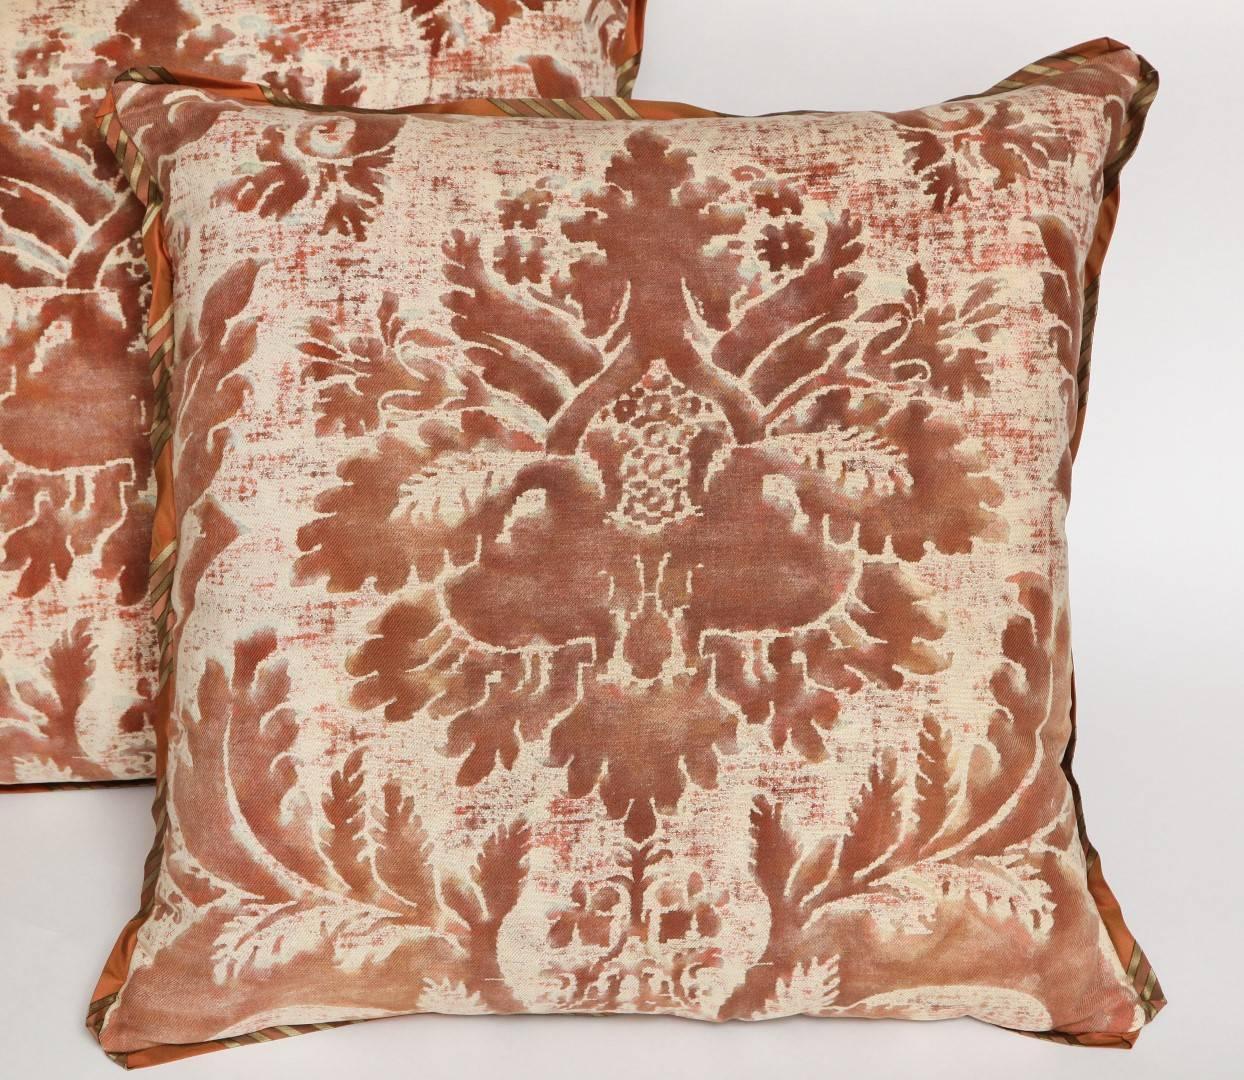 A pair of Fortuny fabric cushions in the Glicine pattern, caramel and white color way, cotton/linen blend backing material and striped silk bias edging, the pattern, 17th century Italian design with Wisteria motif. Newly made using vintage Fortuny